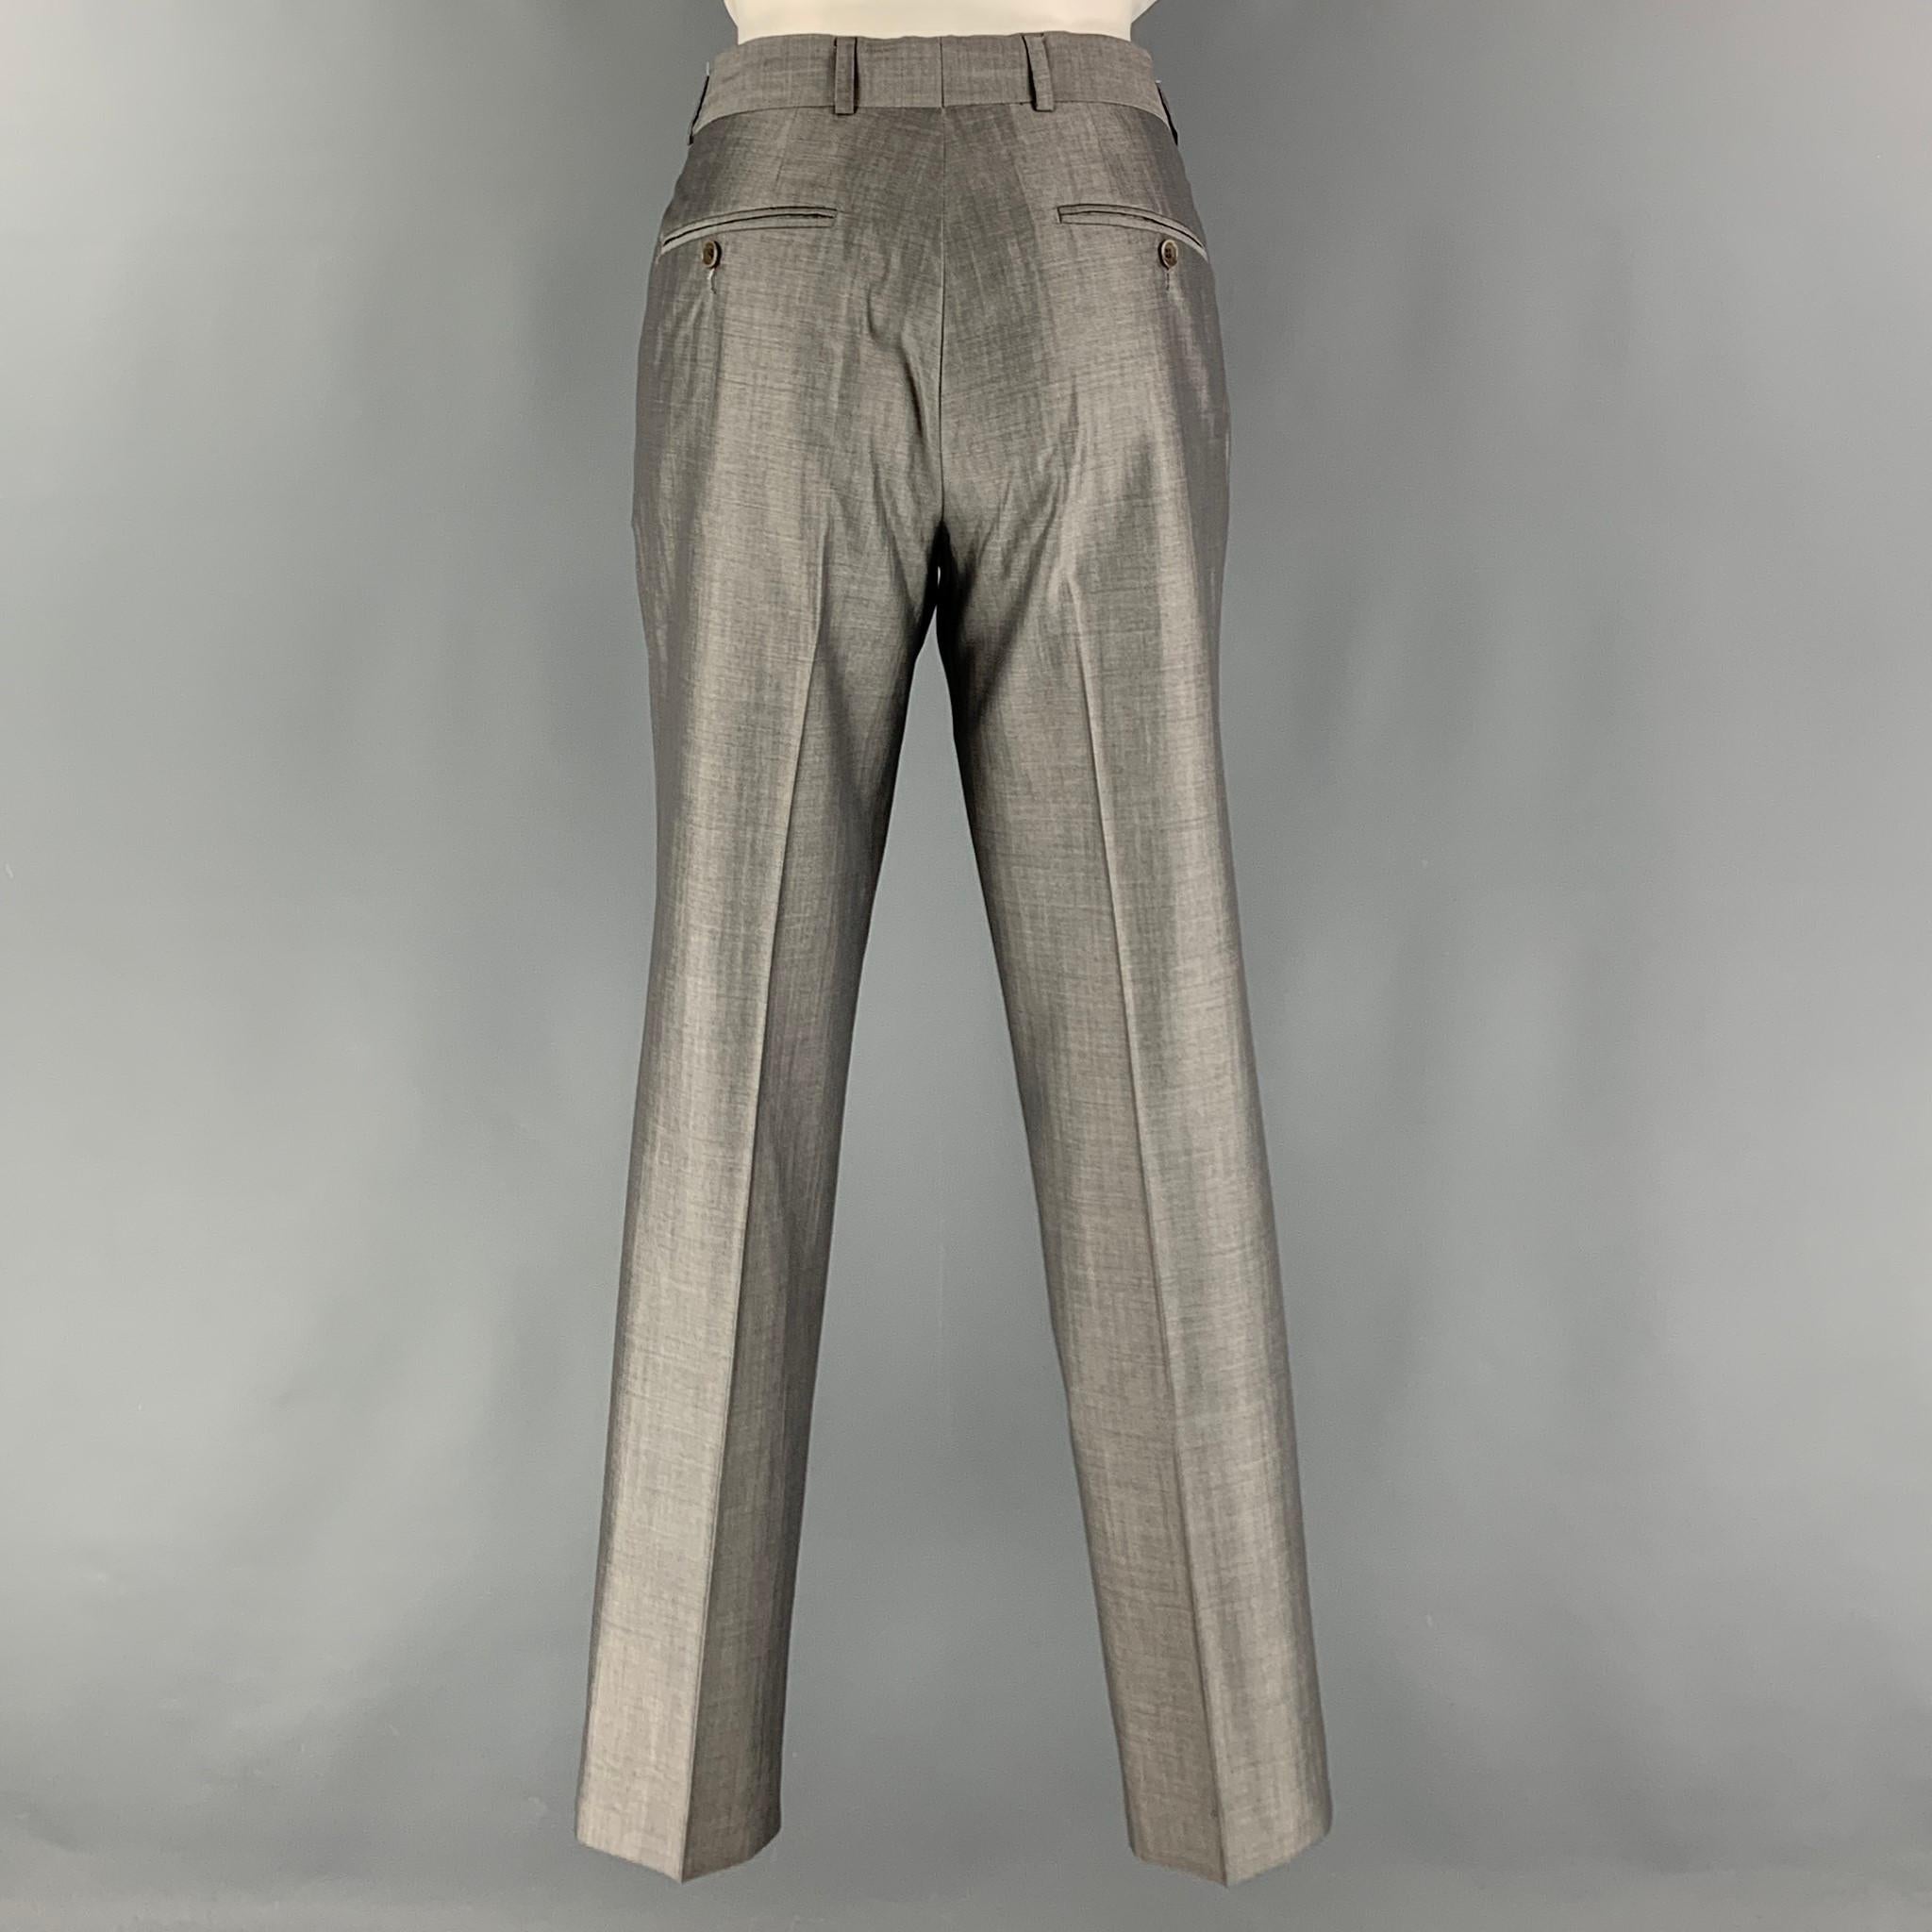 SPONTINI Size 36 Grey Shimmery Wool Silk Single Breasted 28 30 Suit 5